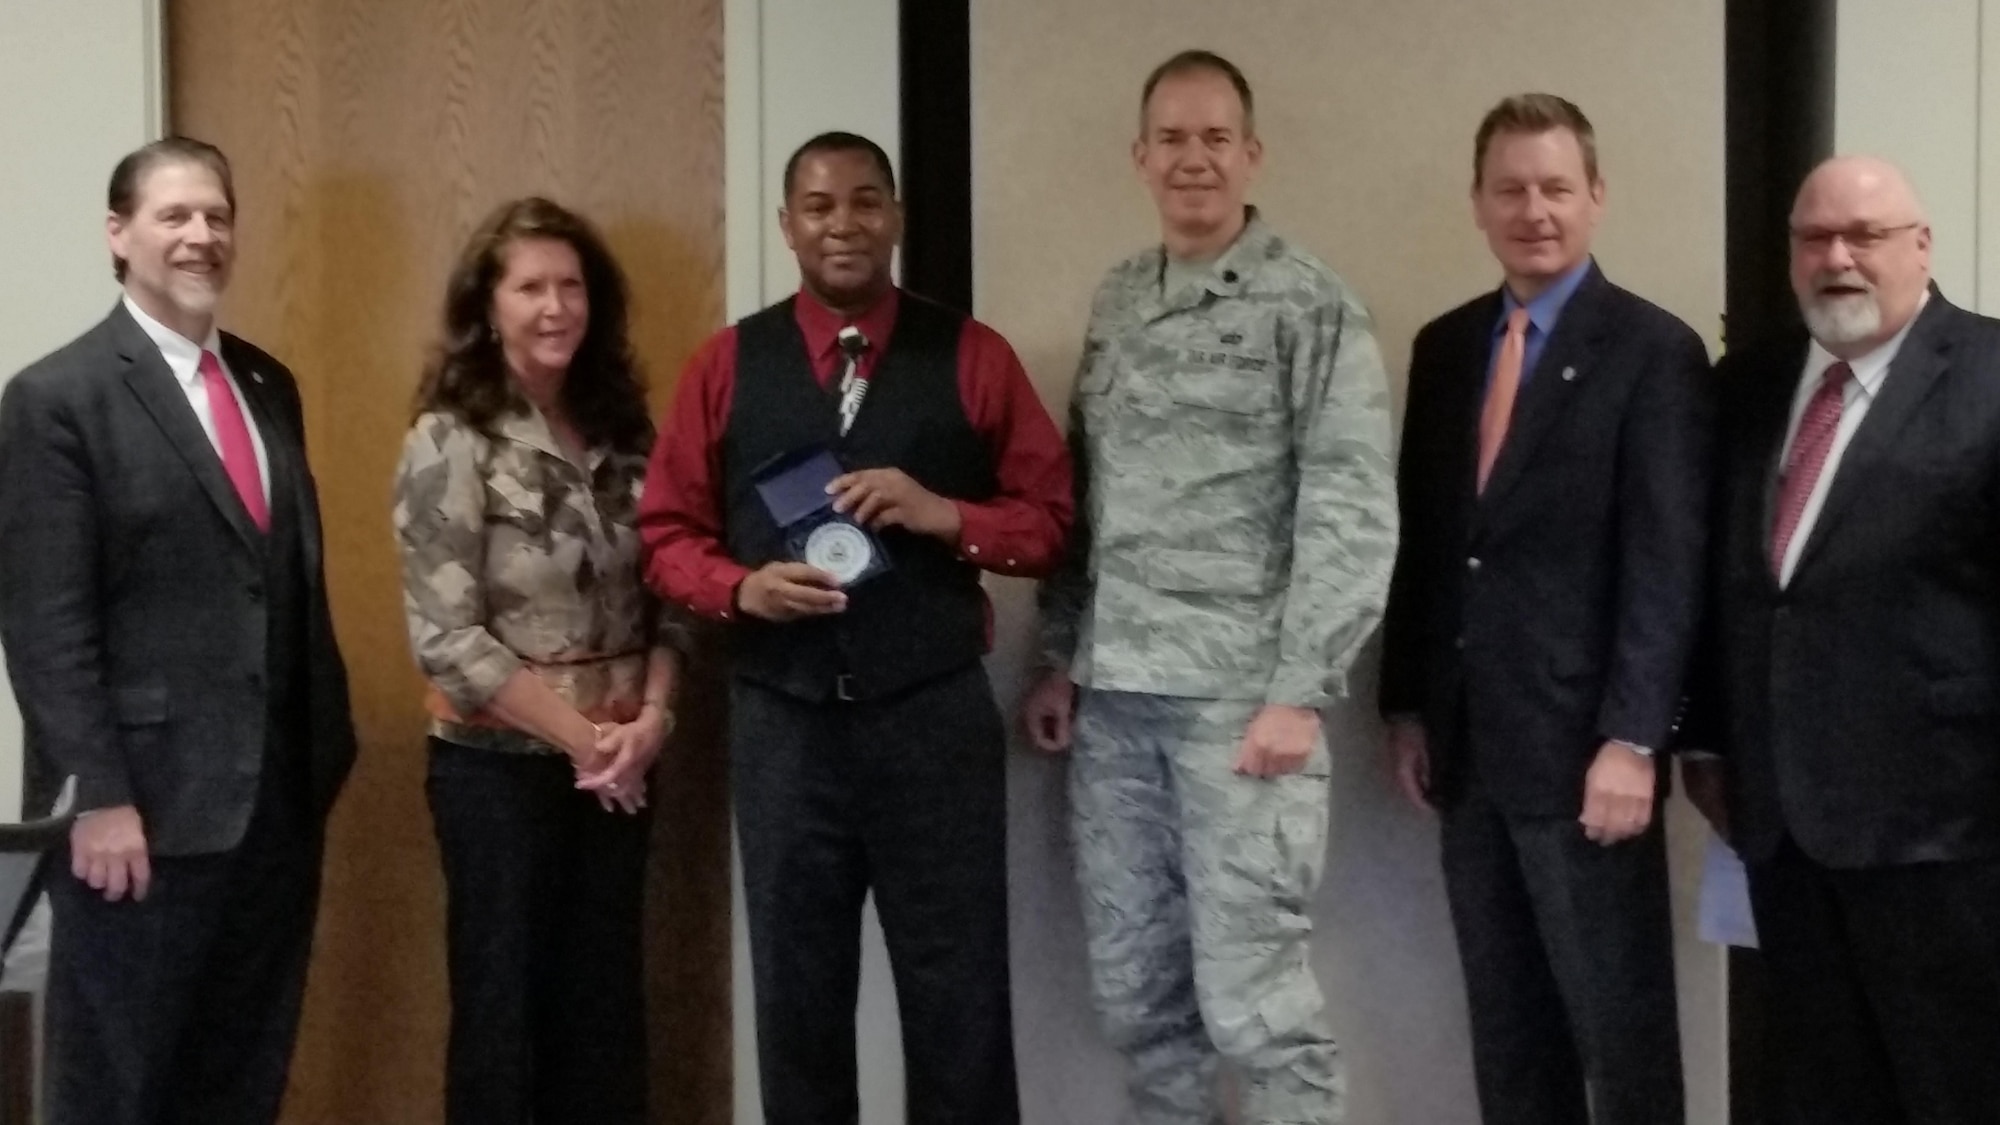 Ric Nunerley, Air Reserve Personnel Center administrative support specialist, stands next to Lt. Col. Bruce Winhold, ARPC process manager, after receiving a Wonderful Outstanding Worker Award during the Colorado Federal Executive Board quarterly meeting and breakfast Jan. 28, 2016, in Denver. (U.S. Air Force photo/Mark Nelson)